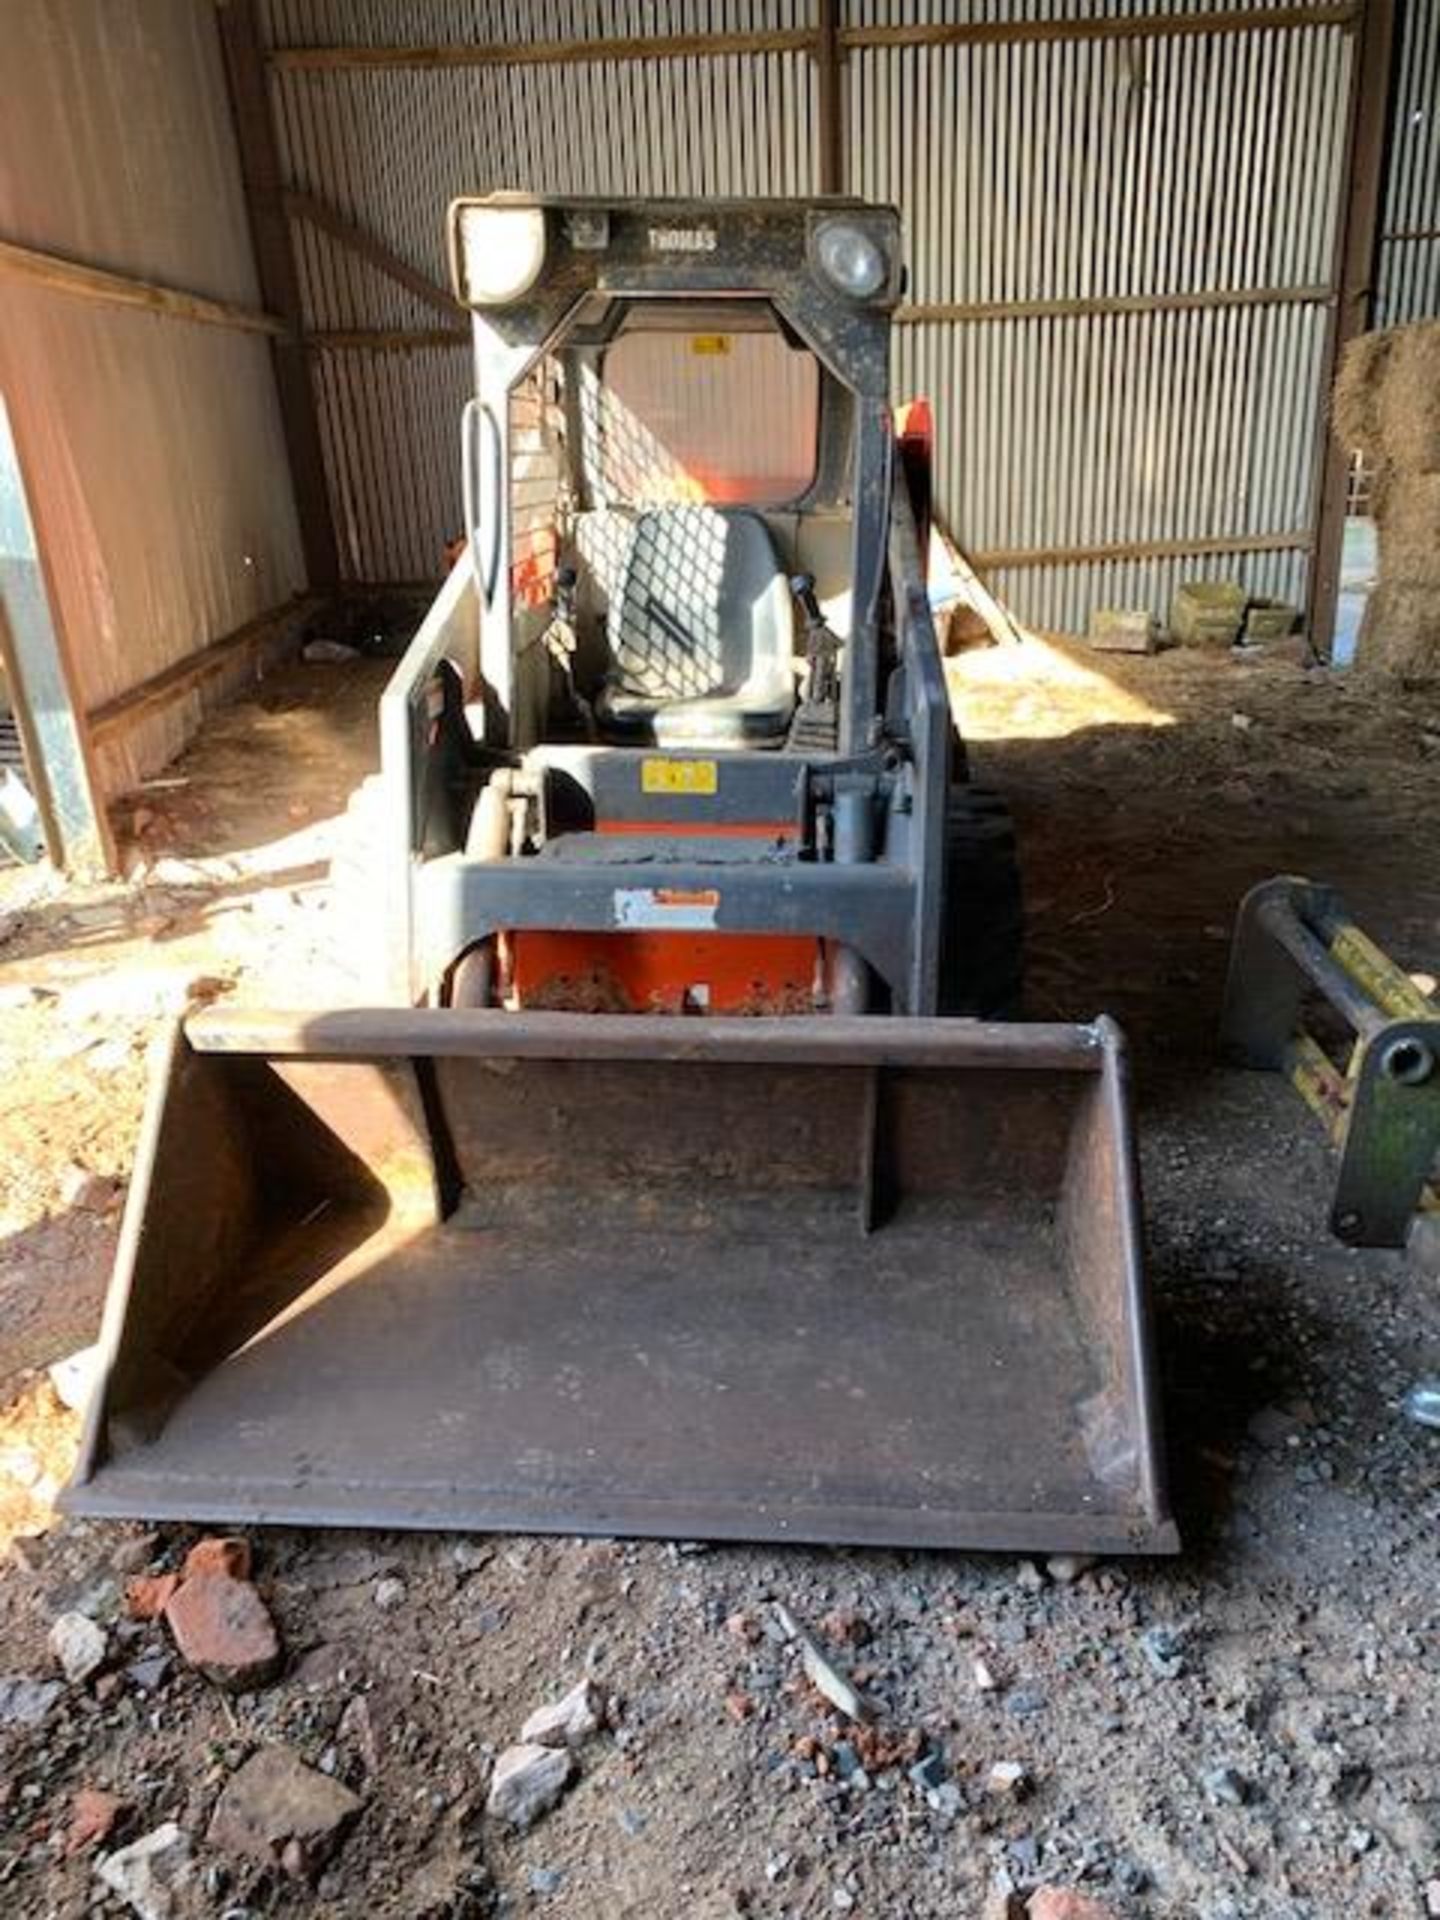 THOMAS 153 SKID STEER LOADER c/w 5ft BUCKET,ROAD BRUSH AND MUCK FORKS - Image 2 of 6